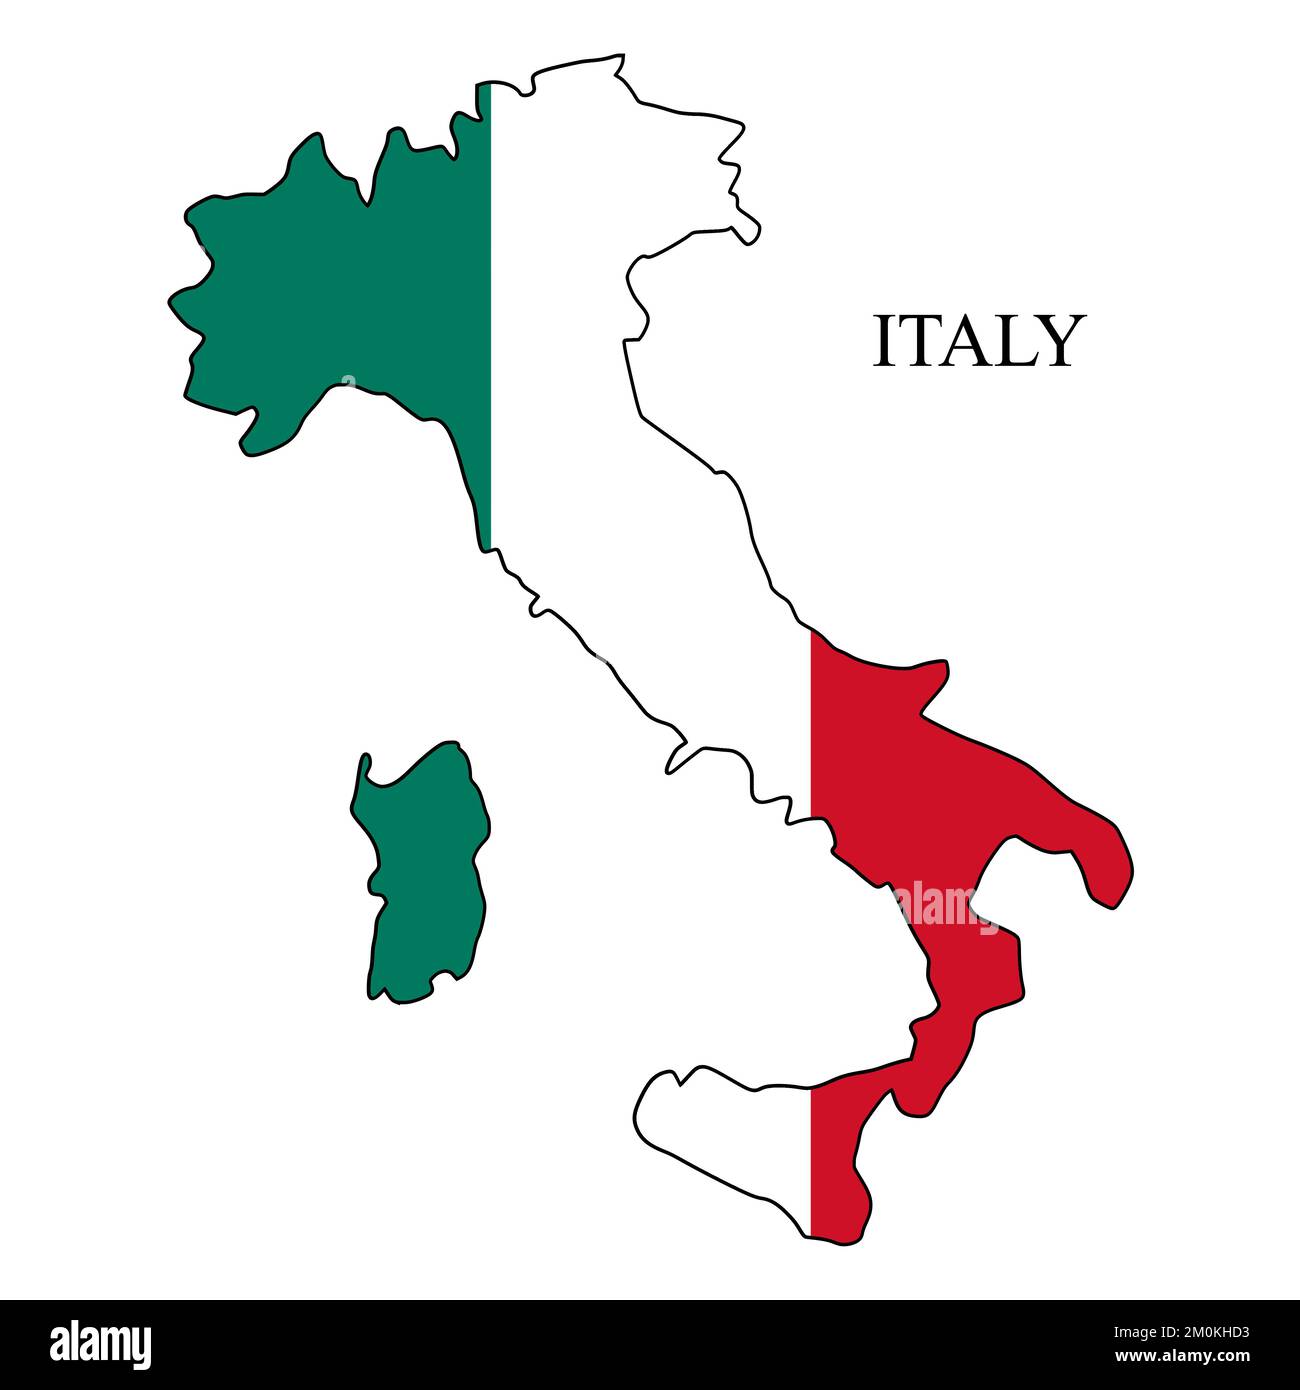 Italy map vector illustration. Global economy. Famous country. Southern Europe. Europe. Stock Vector